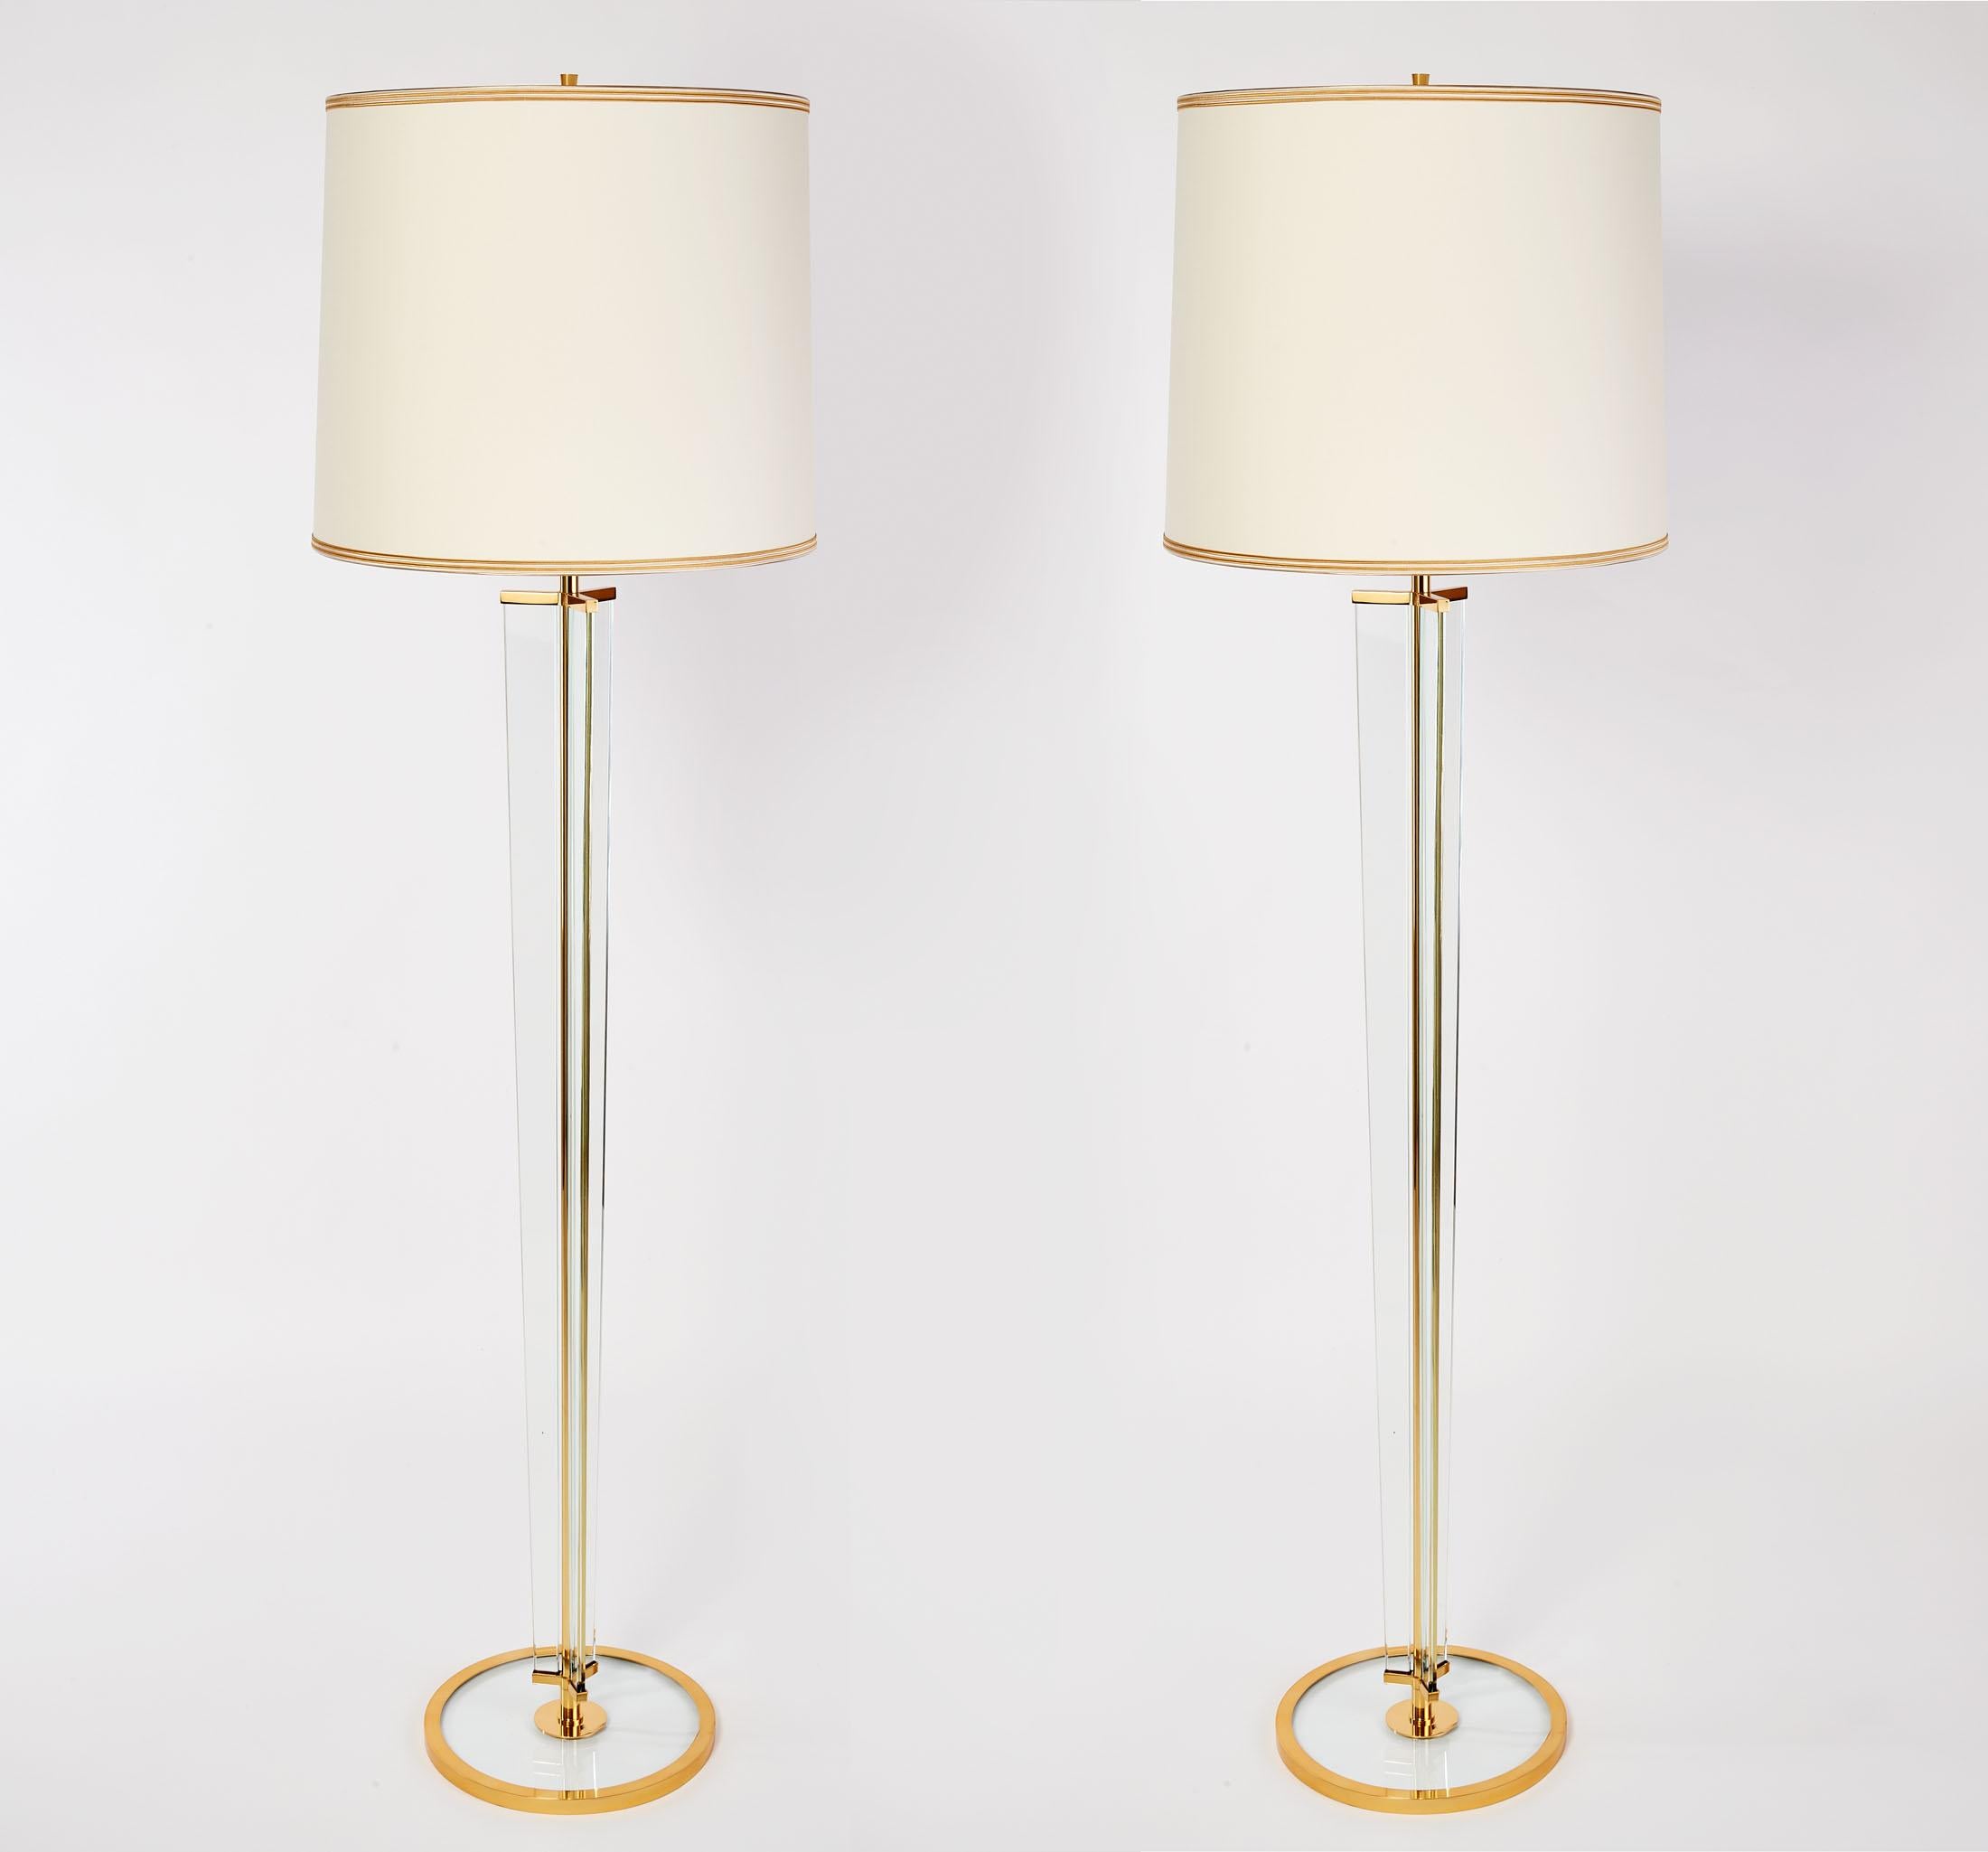 ITALY, ca. 1950
Magnificent pair of tall tripartite clear glass floor lamps with polished brass mounts attributed to Fontana Arte
75 H x 21 Diameter at Shade, 14 Diameter at Base
Shown as a pair, priced and sold individually
Rewired for use in the